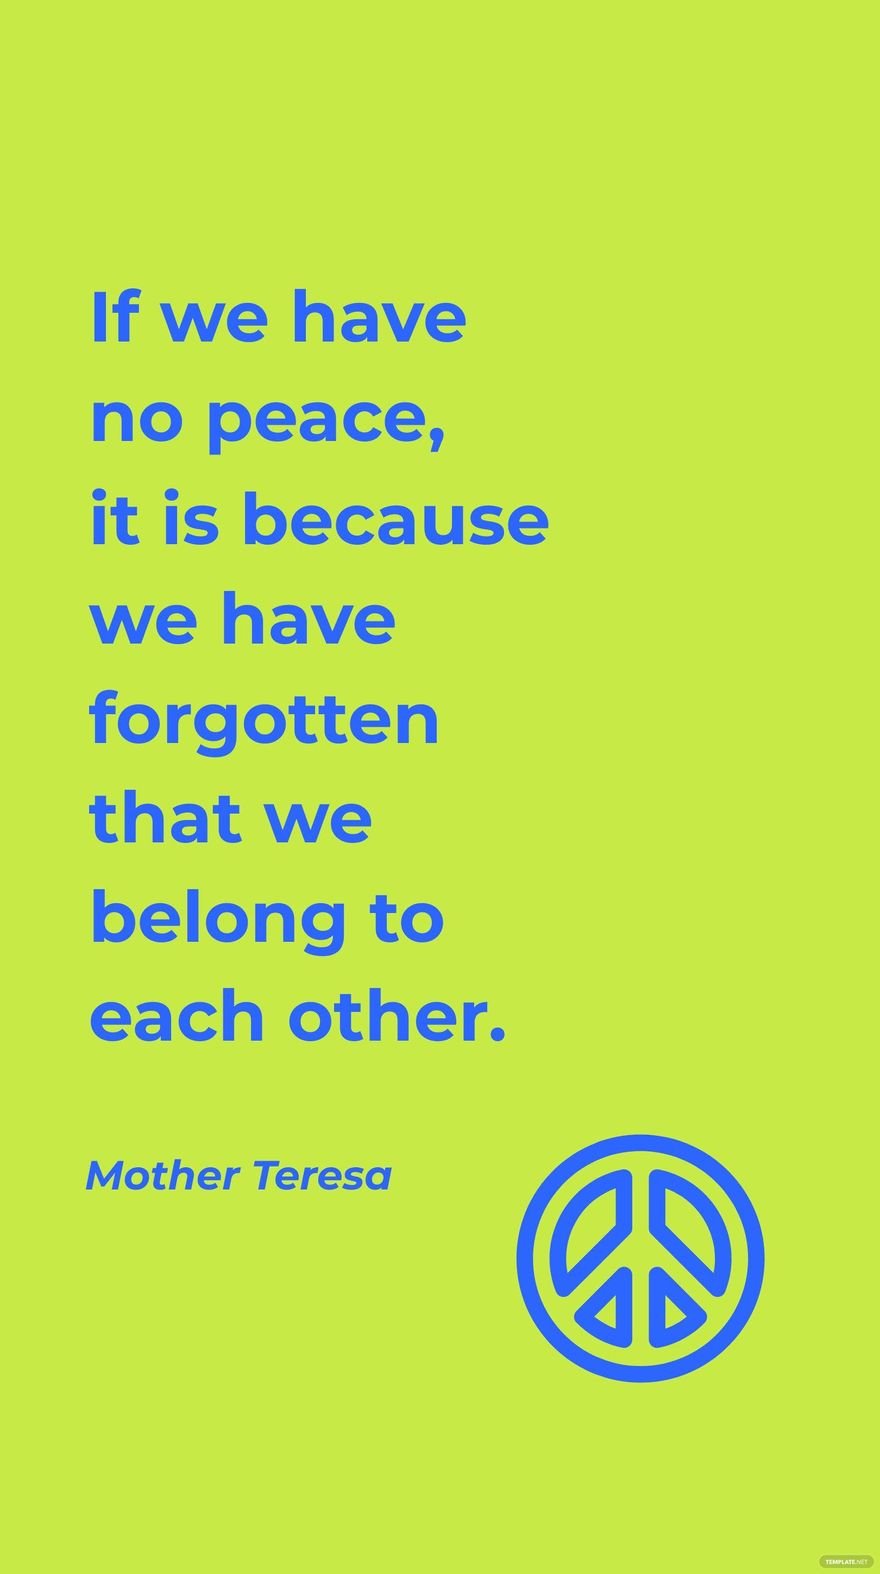 Mother Teresa - If we have no peace, it is because we have forgotten that we belong to each other.